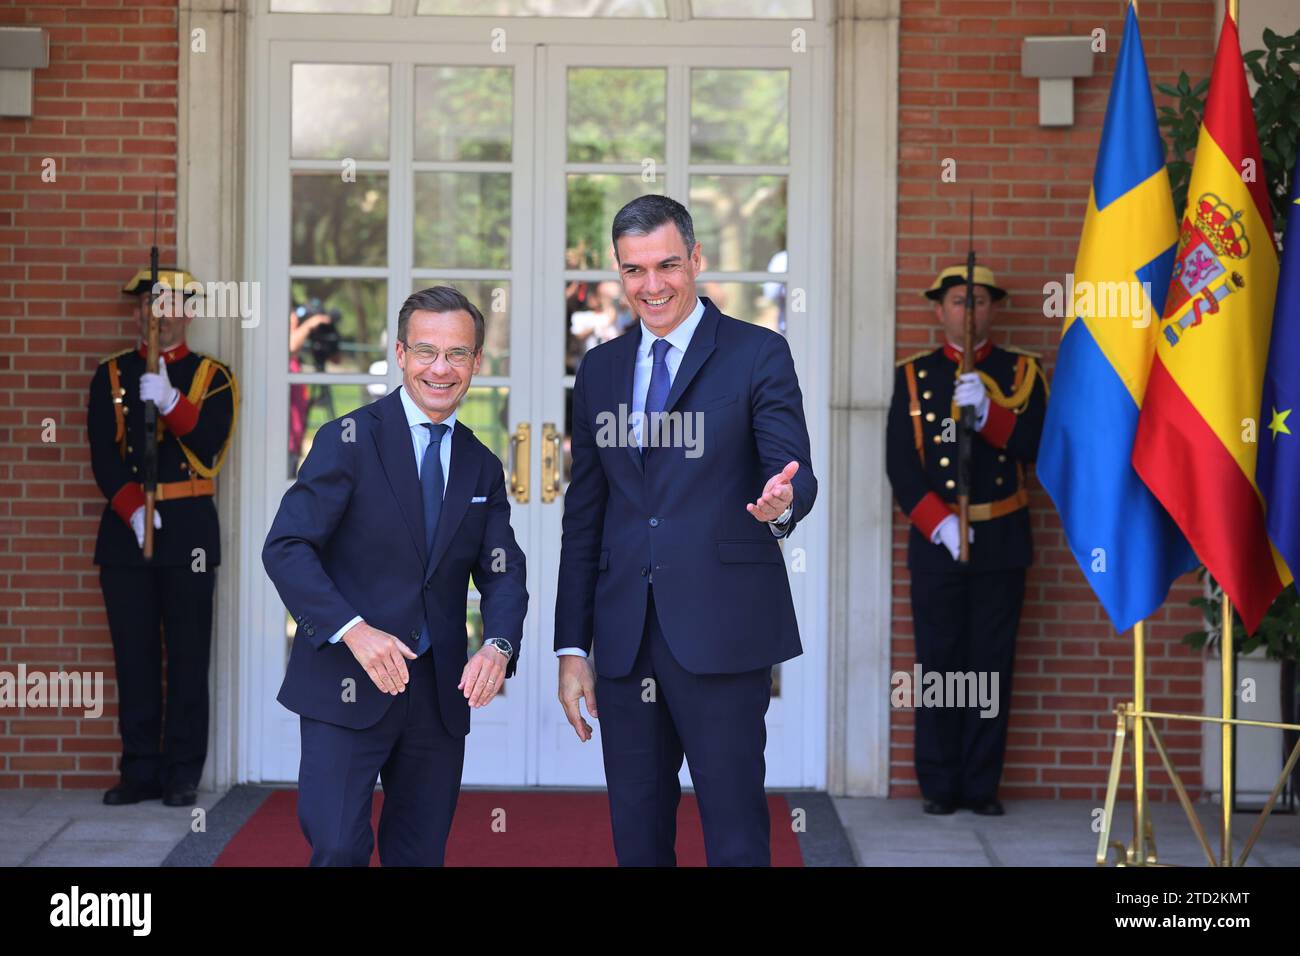 Madrid, 06/05/2023. Moncloa Palace. The president of the government, Pedro Sánchez, receives the Prime Minister of Sweden, Ulf Kristersson. Photo: Jaime García. ARCHDC. Credit: Album / Archivo ABC / Jaime García Stock Photo